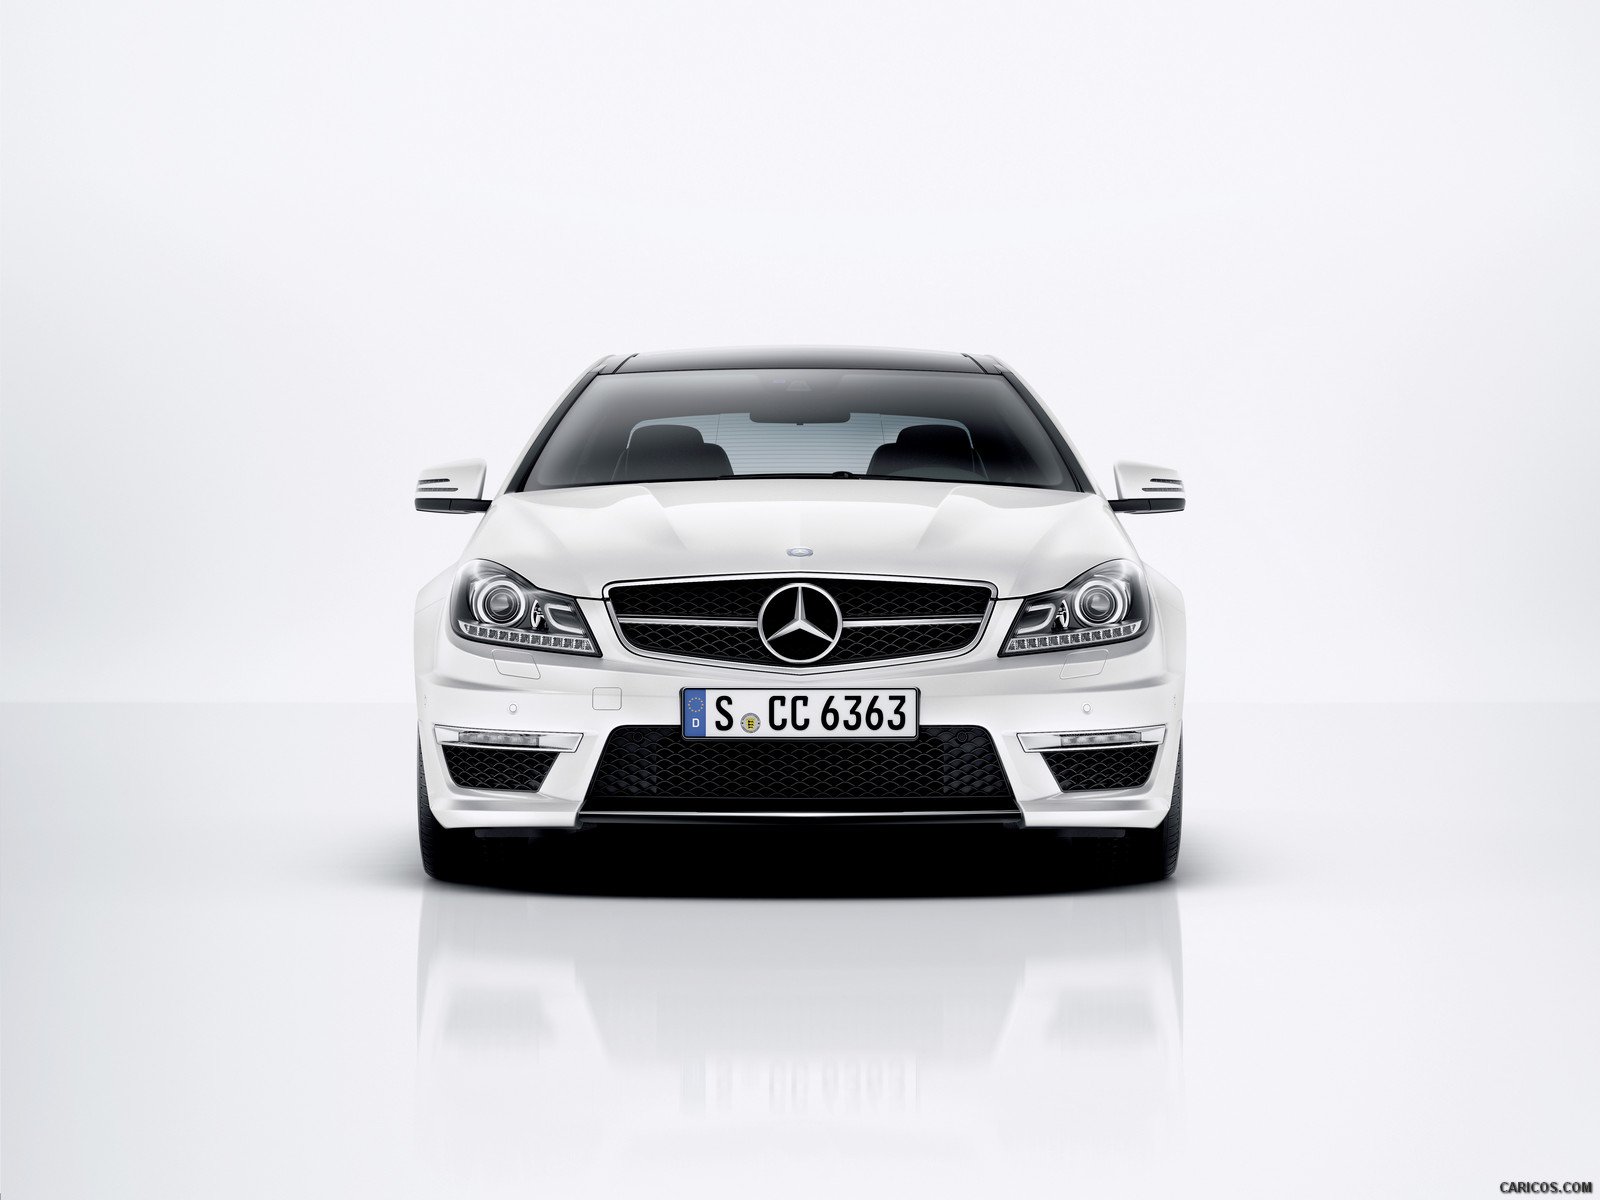 Mercedes-Benz C63 AMG Coupe (2012)  - Front, #61 of 64